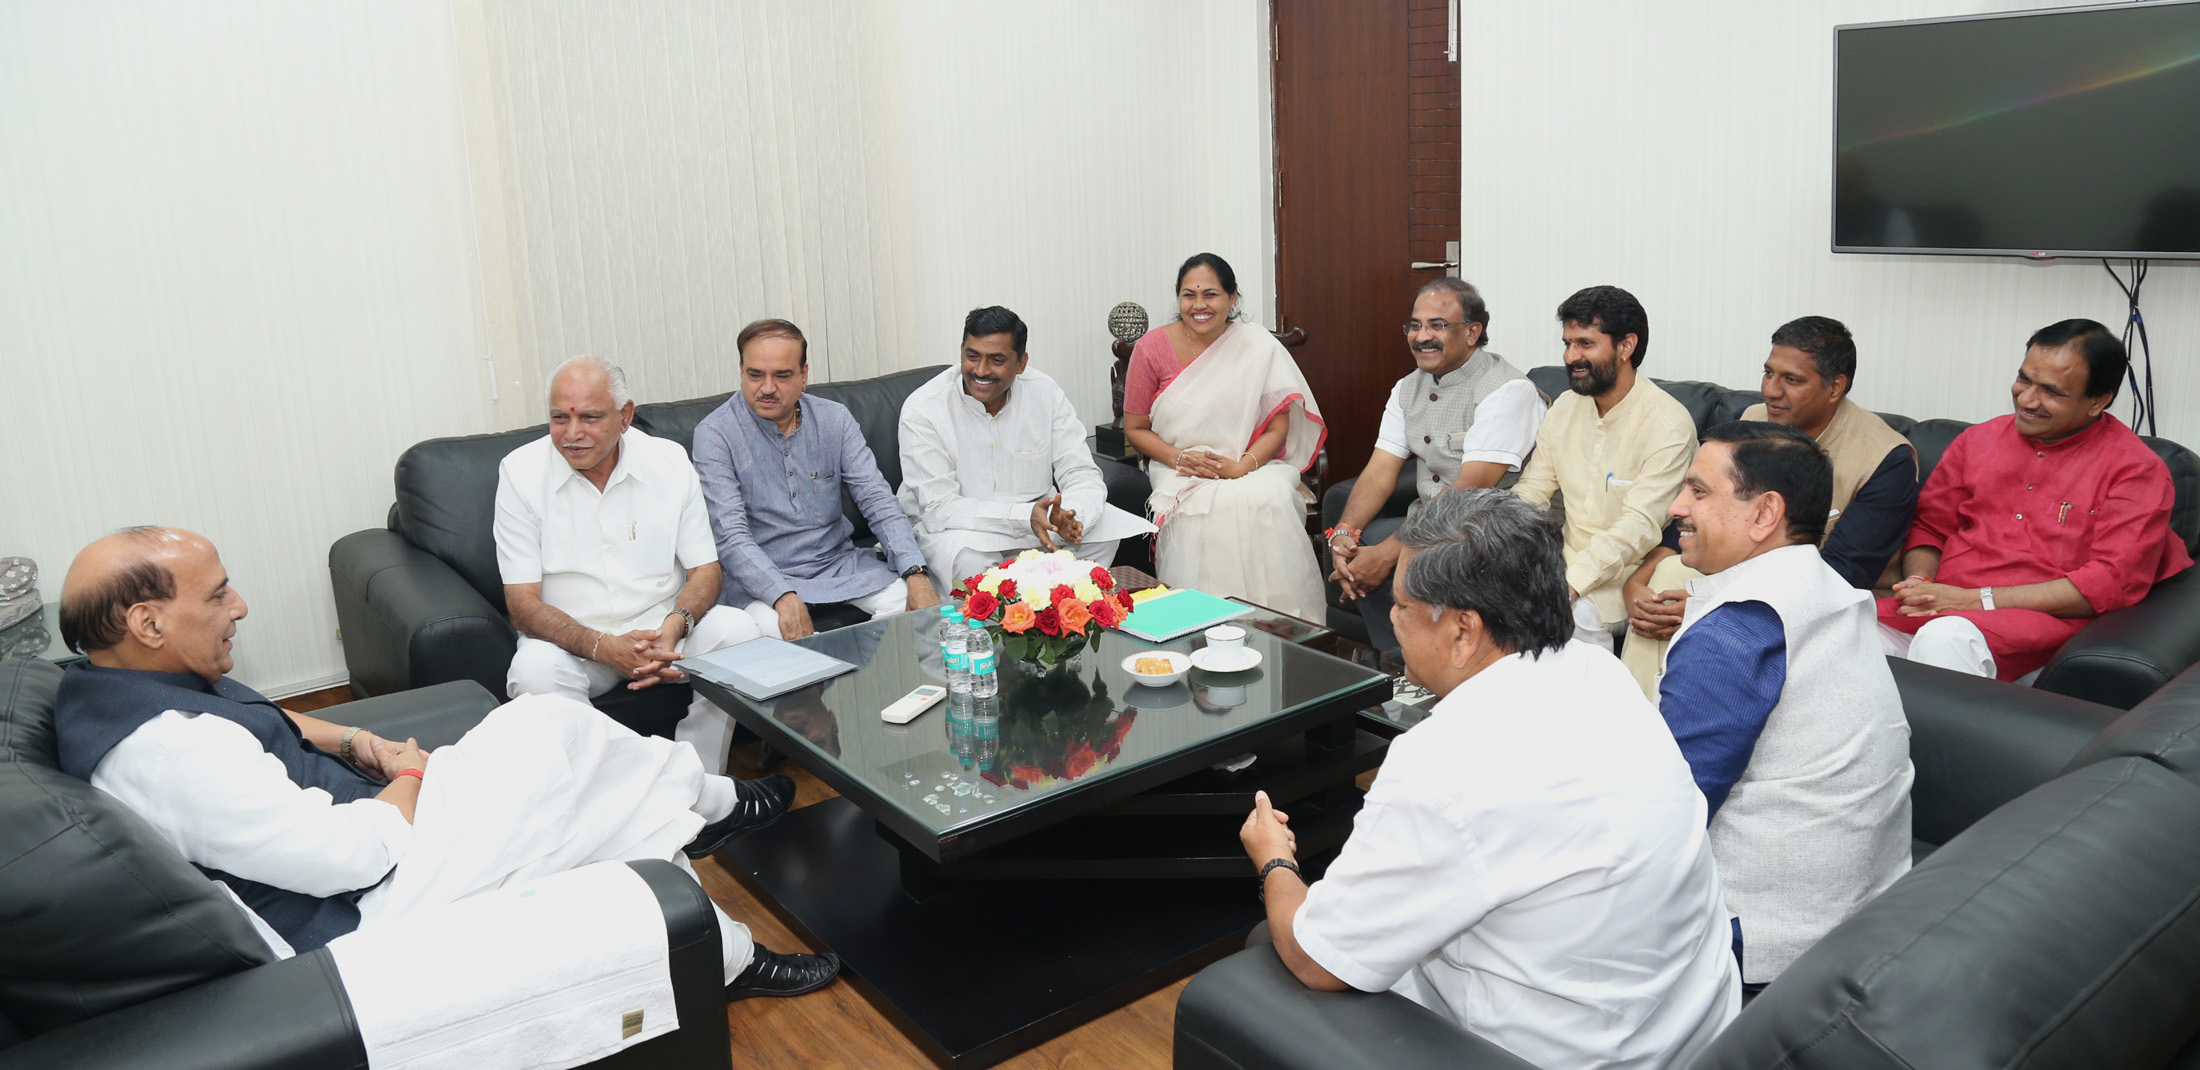 A delegation from Karnataka led by the Union Minister for Chemicals & Fertilizers and Parliamentary Affairs, Shri Ananth Kumar and the MP (Lok Sabha), Shri B.S. Yeddyurappa meeting the Union Home Minister, Shri Rajnath Singh, in New Delhi on November 09, 2016.